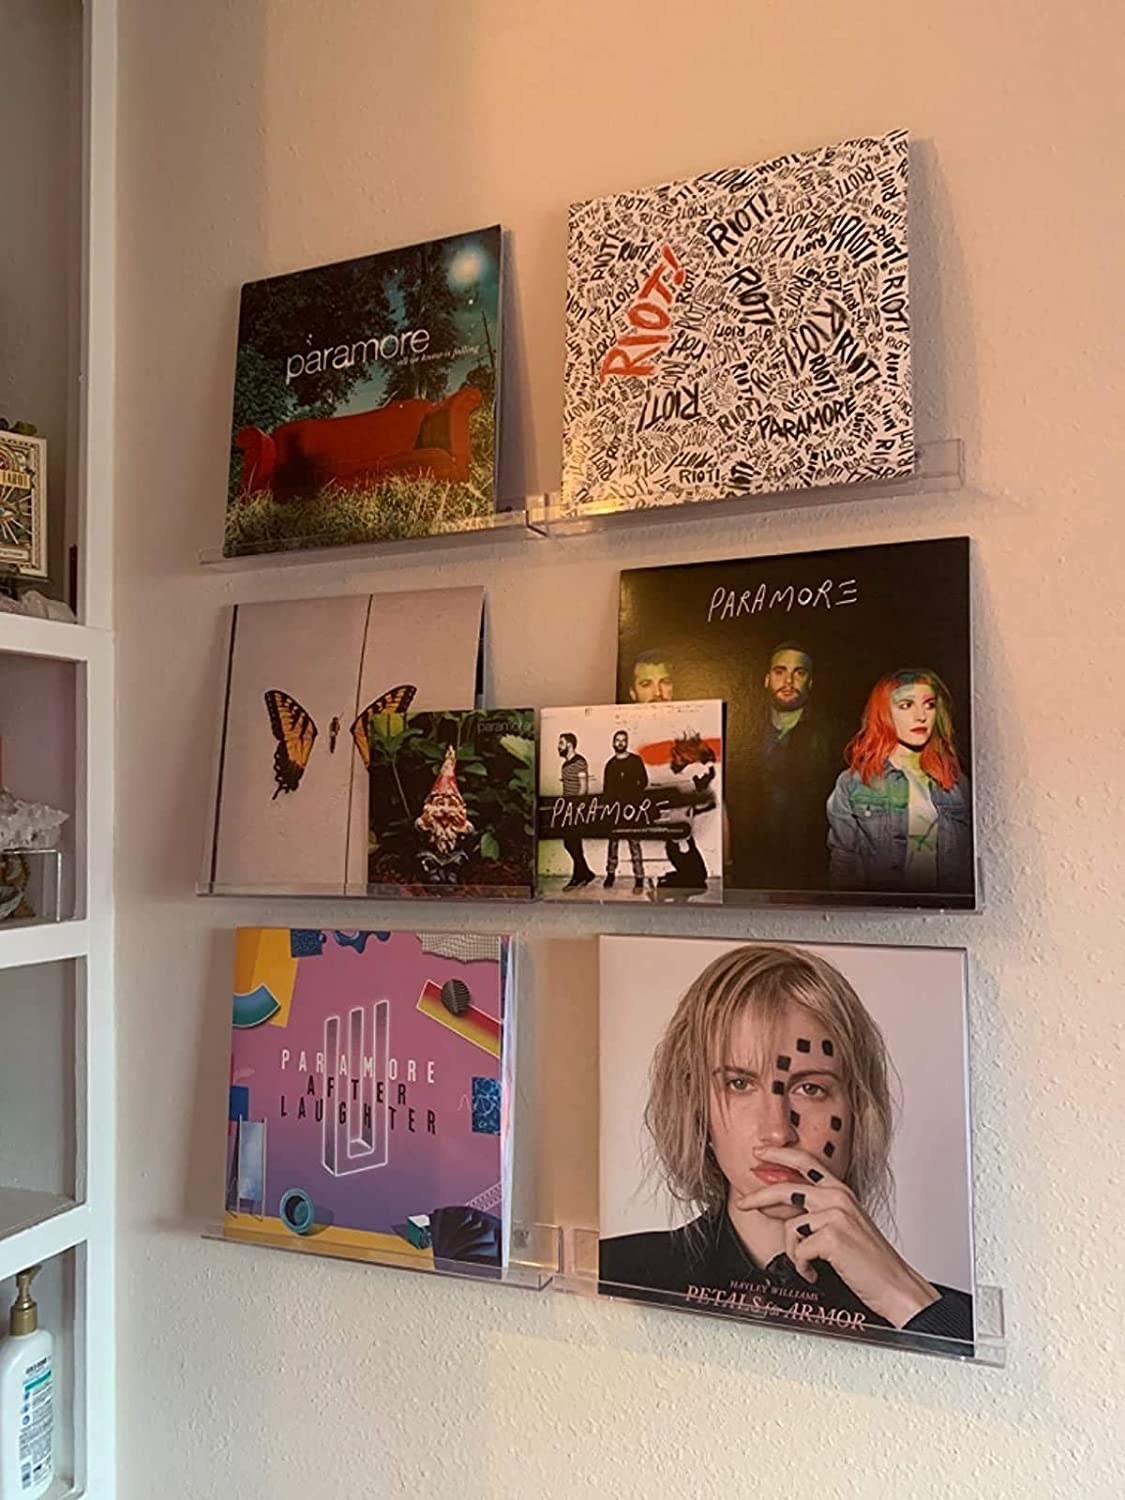 The shelves on a wall displaying a selection of Paramore albums